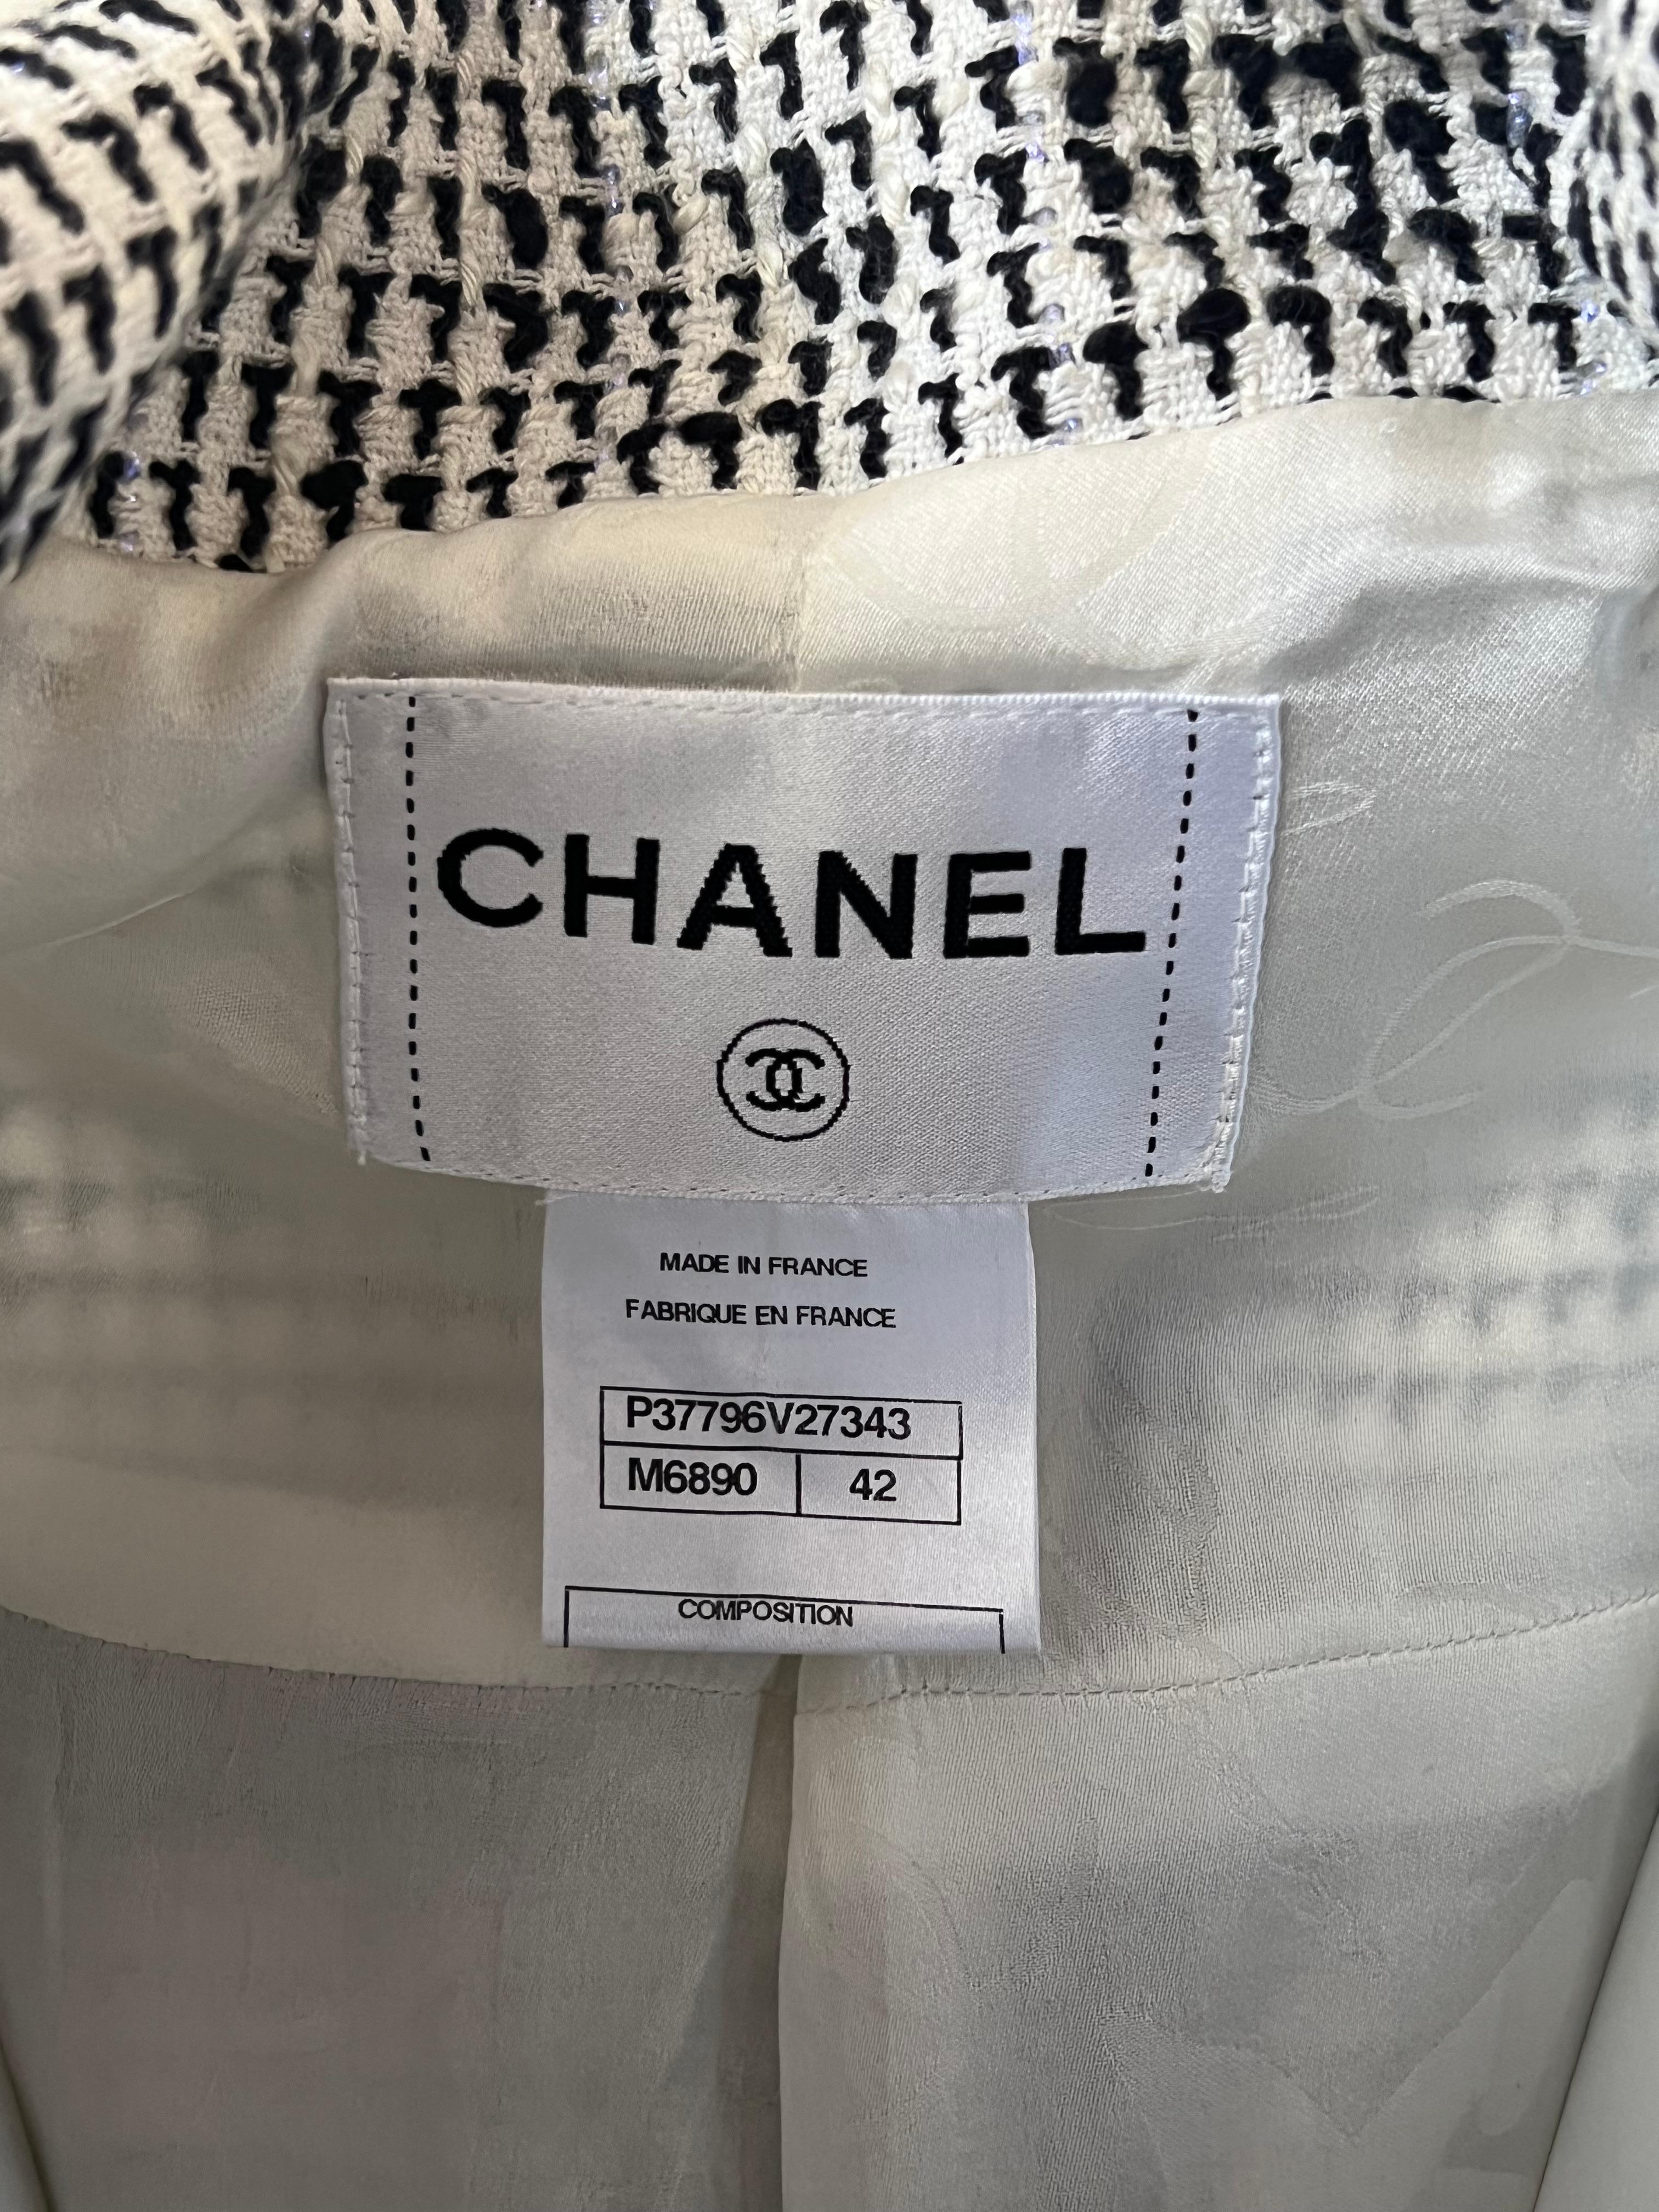 Chanel Dress Coat Black and White Tweed 2010 For Sale 5